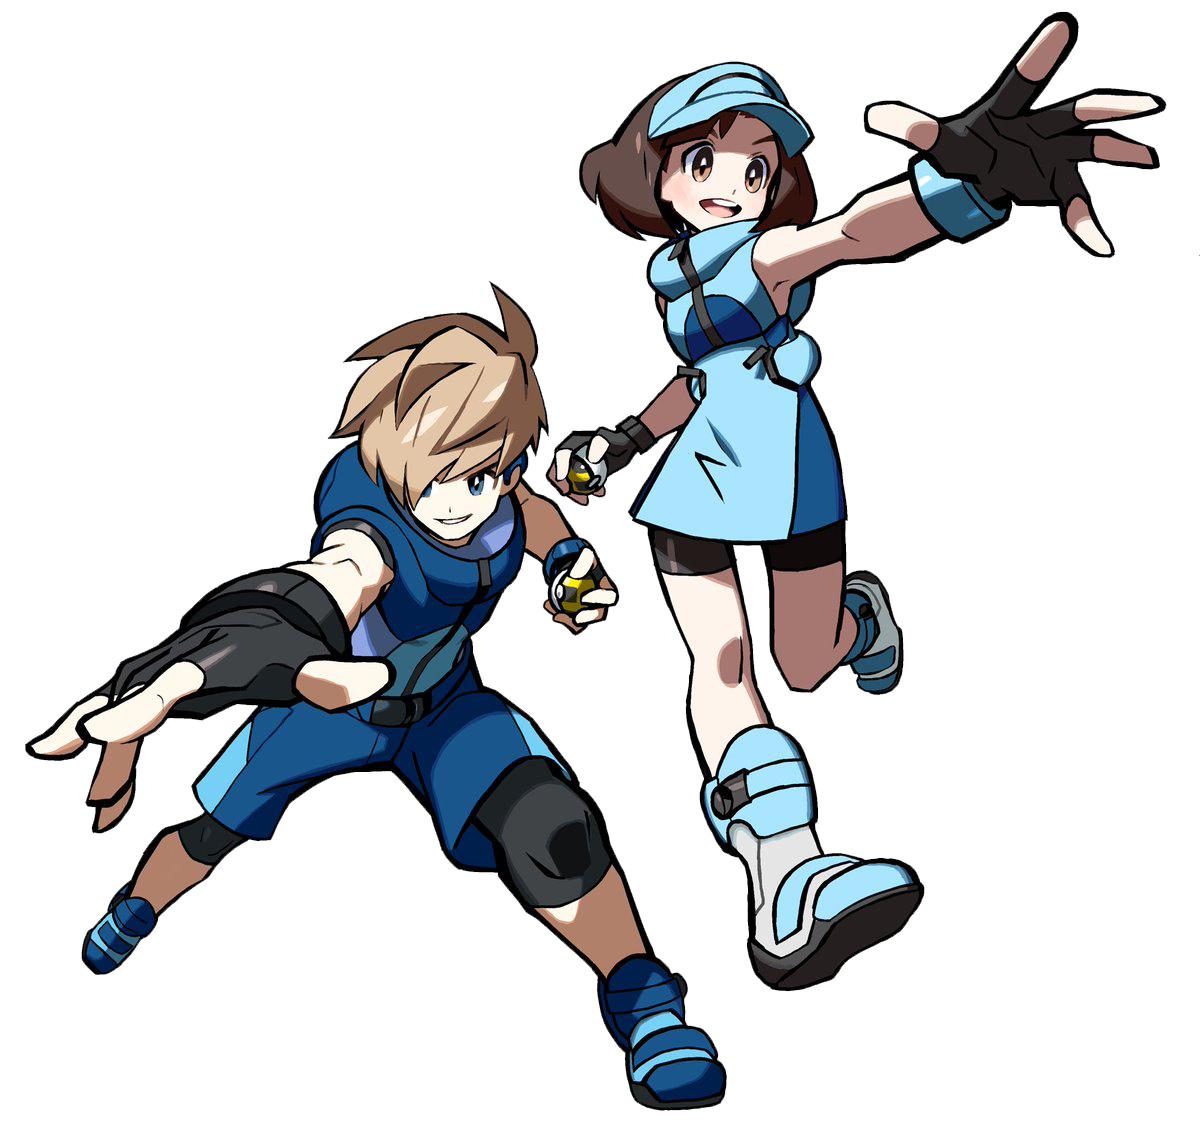 Pokemon Tricks And Treats Tokiya Also Designed The Male Female Ace Trainers And Swimmers For Pokemon Sun And Moon Link To Their Personal Website T Co P3fuq59qos Twitter Is Obviously In The Above